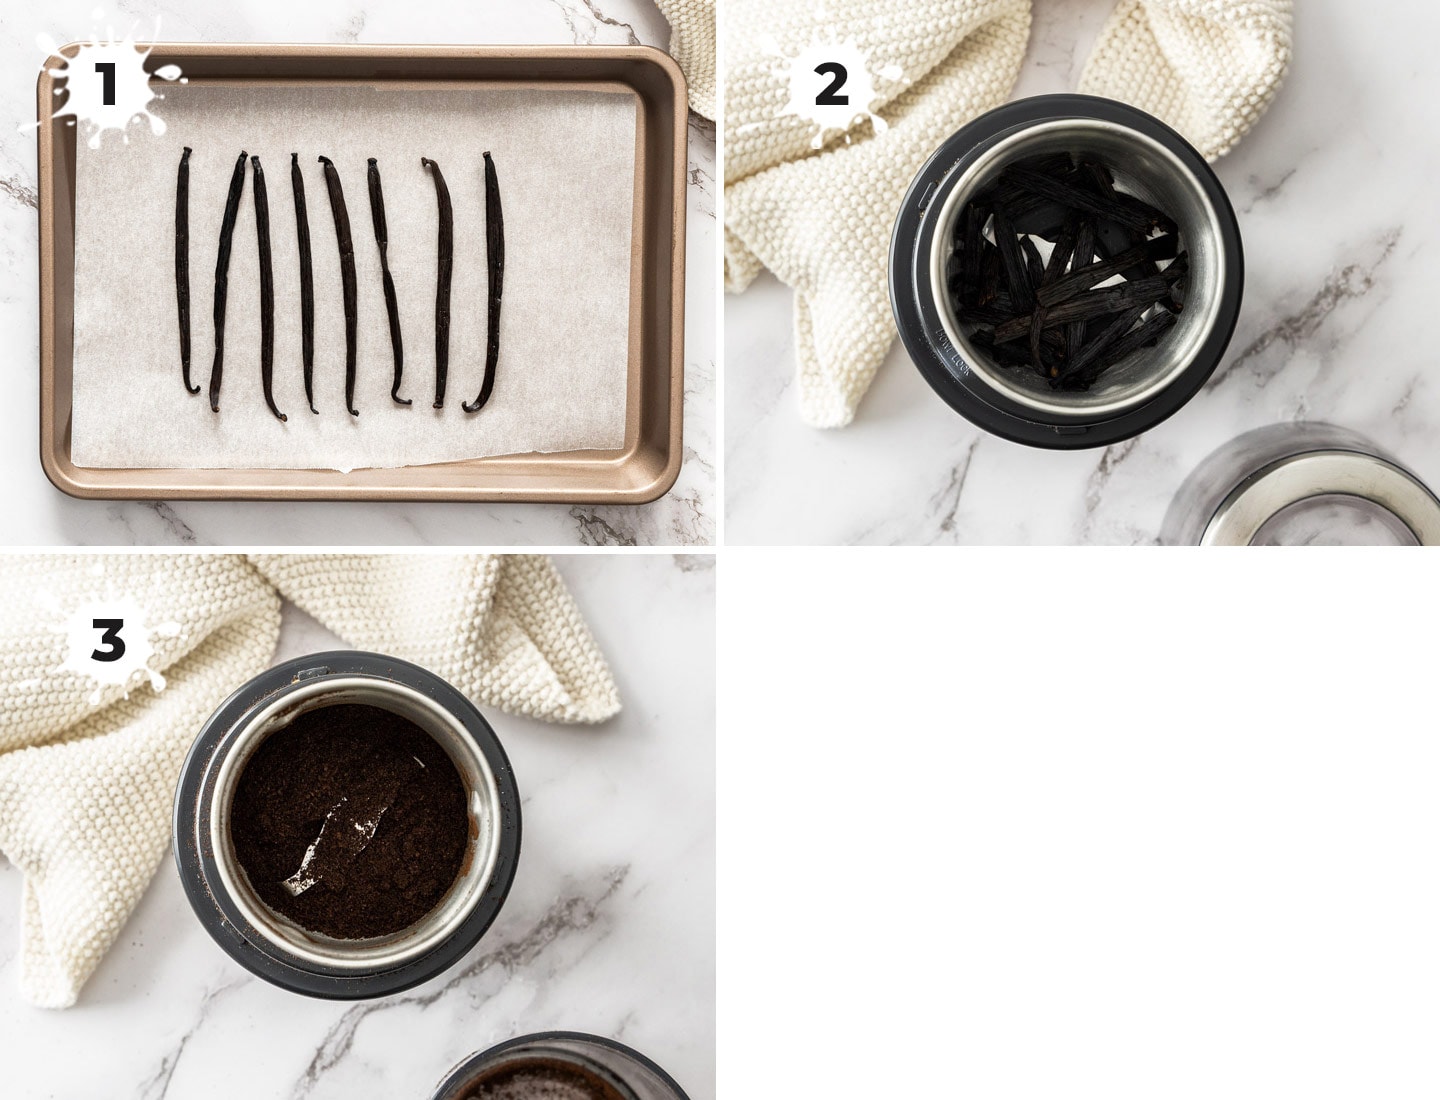 A collage showing the steps to make vanilla powder.